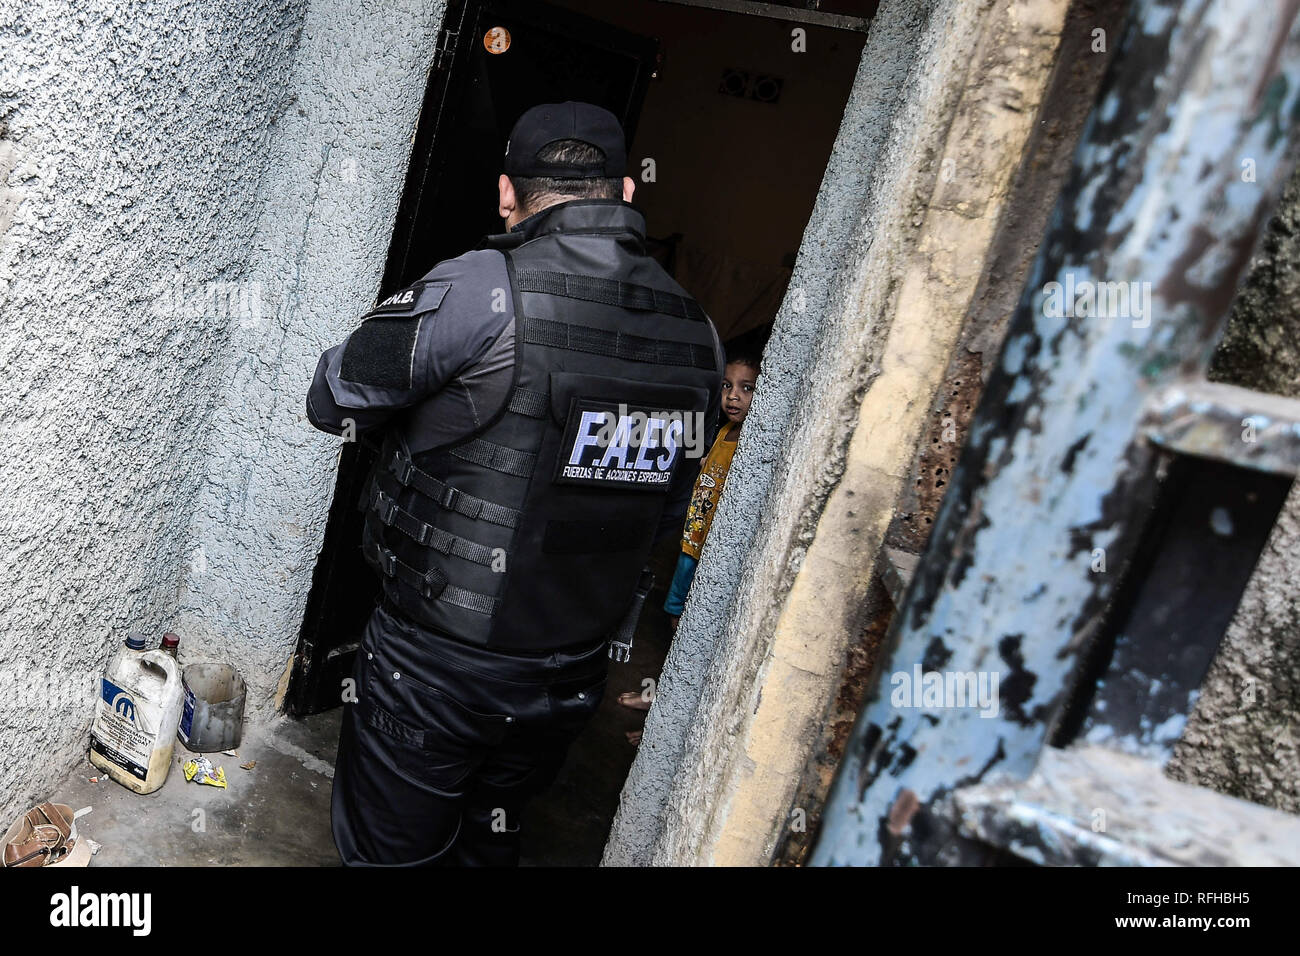 Caracas, Venezuela. 25th January 2019. A member of the Bolivarian National Police Special Forces (‘FAES’ in Spanish) seen speaking to a little kid during a Police raid operation against criminal groups at Petare slum in Caracas. Credit: SOPA Images Limited/Alamy Live News Stock Photo